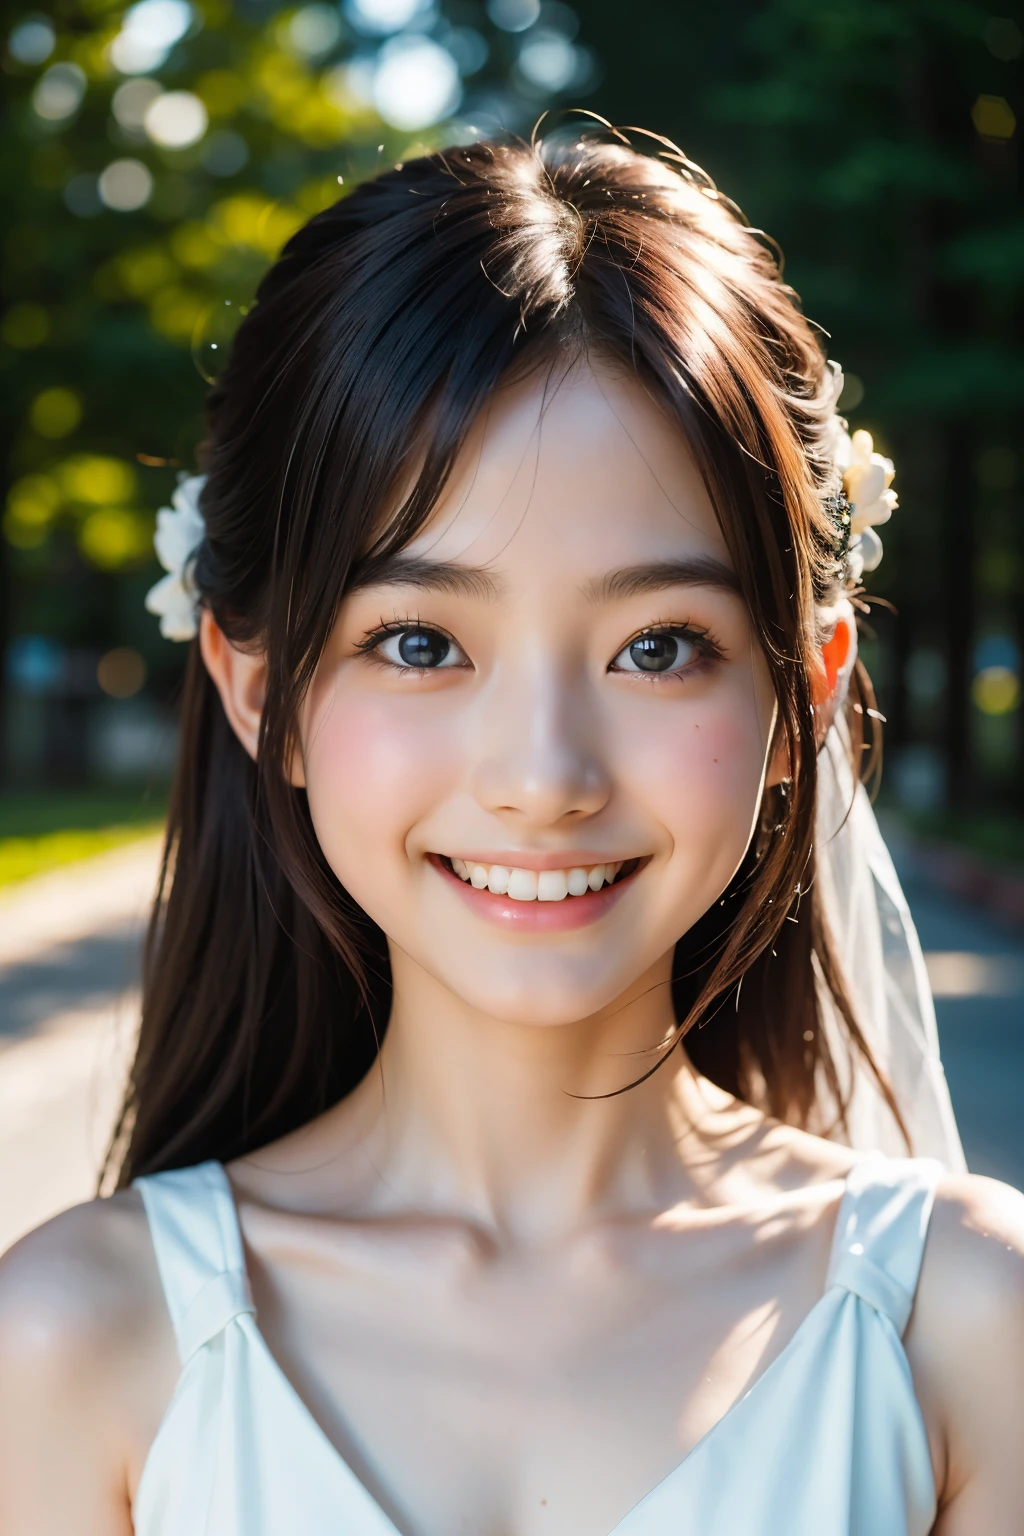 lens: 135mm f1.8, (highest quality),(RAW Photos), (Tabletop:1.1), (Beautiful 19 year old Japanese girl), Cute face, (Deeply chiseled face:0.7), (freckles:0.4), dappled sunlight, Dramatic lighting, Wedding dress, (On campus), shy, (Close-up shot:1.2), (smile),, (Sparkling eyes)、(sunlight)